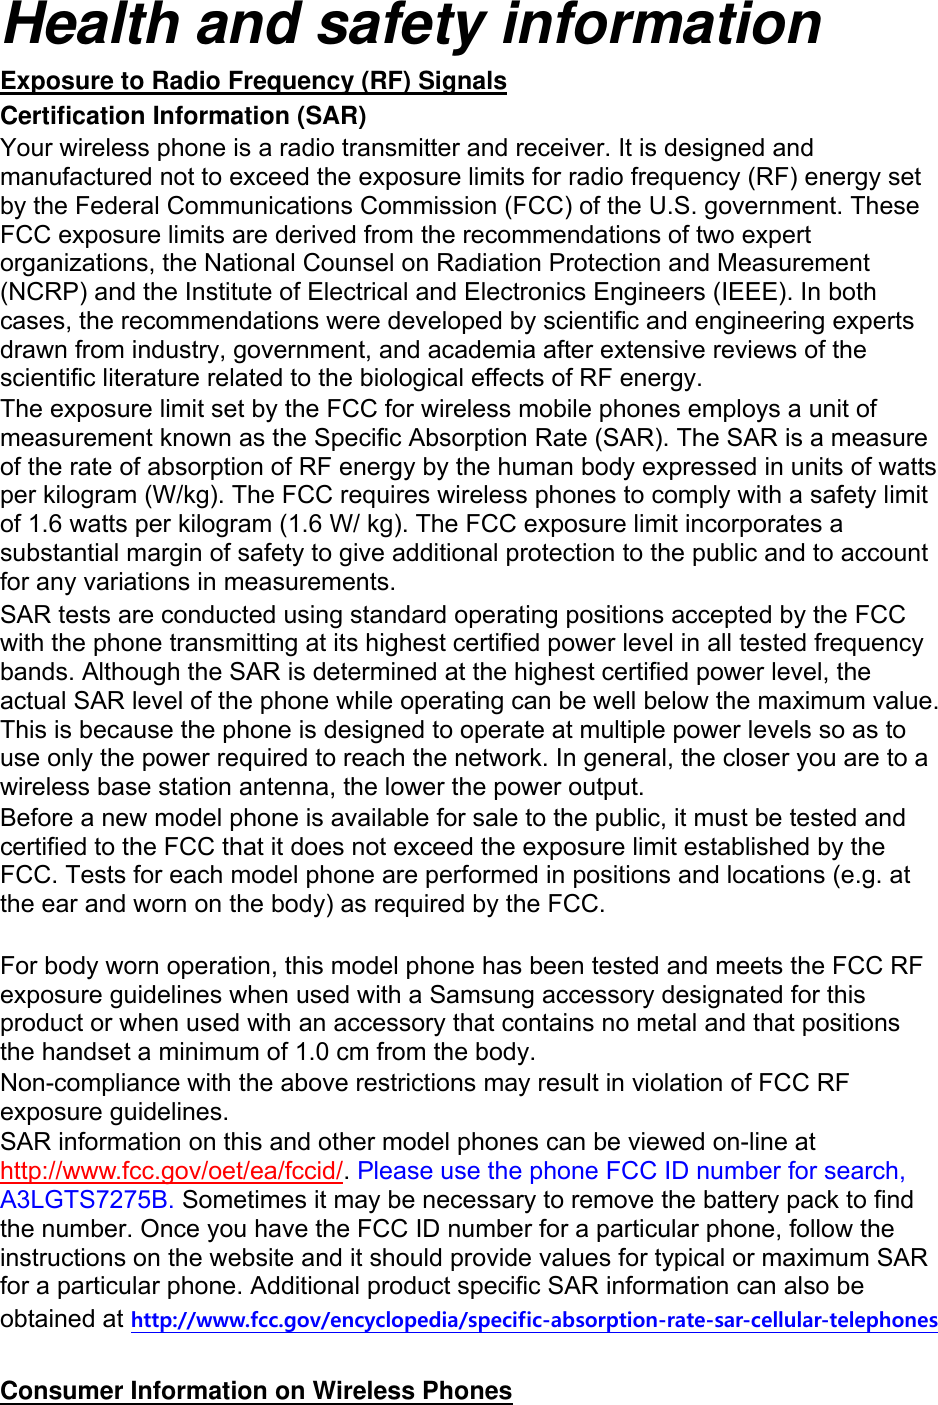 Health and safety information Exposure to Radio Frequency (RF) Signals Certification Information (SAR) Your wireless phone is a radio transmitter and receiver. It is designed and manufactured not to exceed the exposure limits for radio frequency (RF) energy set by the Federal Communications Commission (FCC) of the U.S. government. These FCC exposure limits are derived from the recommendations of two expert organizations, the National Counsel on Radiation Protection and Measurement (NCRP) and the Institute of Electrical and Electronics Engineers (IEEE). In both cases, the recommendations were developed by scientific and engineering experts drawn from industry, government, and academia after extensive reviews of the scientific literature related to the biological effects of RF energy. The exposure limit set by the FCC for wireless mobile phones employs a unit of measurement known as the Specific Absorption Rate (SAR). The SAR is a measure of the rate of absorption of RF energy by the human body expressed in units of watts per kilogram (W/kg). The FCC requires wireless phones to comply with a safety limit of 1.6 watts per kilogram (1.6 W/ kg). The FCC exposure limit incorporates a substantial margin of safety to give additional protection to the public and to account for any variations in measurements. SAR tests are conducted using standard operating positions accepted by the FCC with the phone transmitting at its highest certified power level in all tested frequency bands. Although the SAR is determined at the highest certified power level, the actual SAR level of the phone while operating can be well below the maximum value. This is because the phone is designed to operate at multiple power levels so as to use only the power required to reach the network. In general, the closer you are to a wireless base station antenna, the lower the power output. Before a new model phone is available for sale to the public, it must be tested and certified to the FCC that it does not exceed the exposure limit established by the FCC. Tests for each model phone are performed in positions and locations (e.g. at the ear and worn on the body) as required by the FCC.      For body worn operation, this model phone has been tested and meets the FCC RF exposure guidelines when used with a Samsung accessory designated for this product or when used with an accessory that contains no metal and that positions the handset a minimum of 1.0 cm from the body.   Non-compliance with the above restrictions may result in violation of FCC RF exposure guidelines. SAR information on this and other model phones can be viewed on-line at http://www.fcc.gov/oet/ea/fccid/. Please use the phone FCC ID number for search, A3LGTS7275B. Sometimes it may be necessary to remove the battery pack to find the number. Once you have the FCC ID number for a particular phone, follow the instructions on the website and it should provide values for typical or maximum SAR for a particular phone. Additional product specific SAR information can also be obtained at http://www.fcc.gov/encyclopedia/specific-absorption-rate-sar-cellular-telephones  Consumer Information on Wireless Phones 